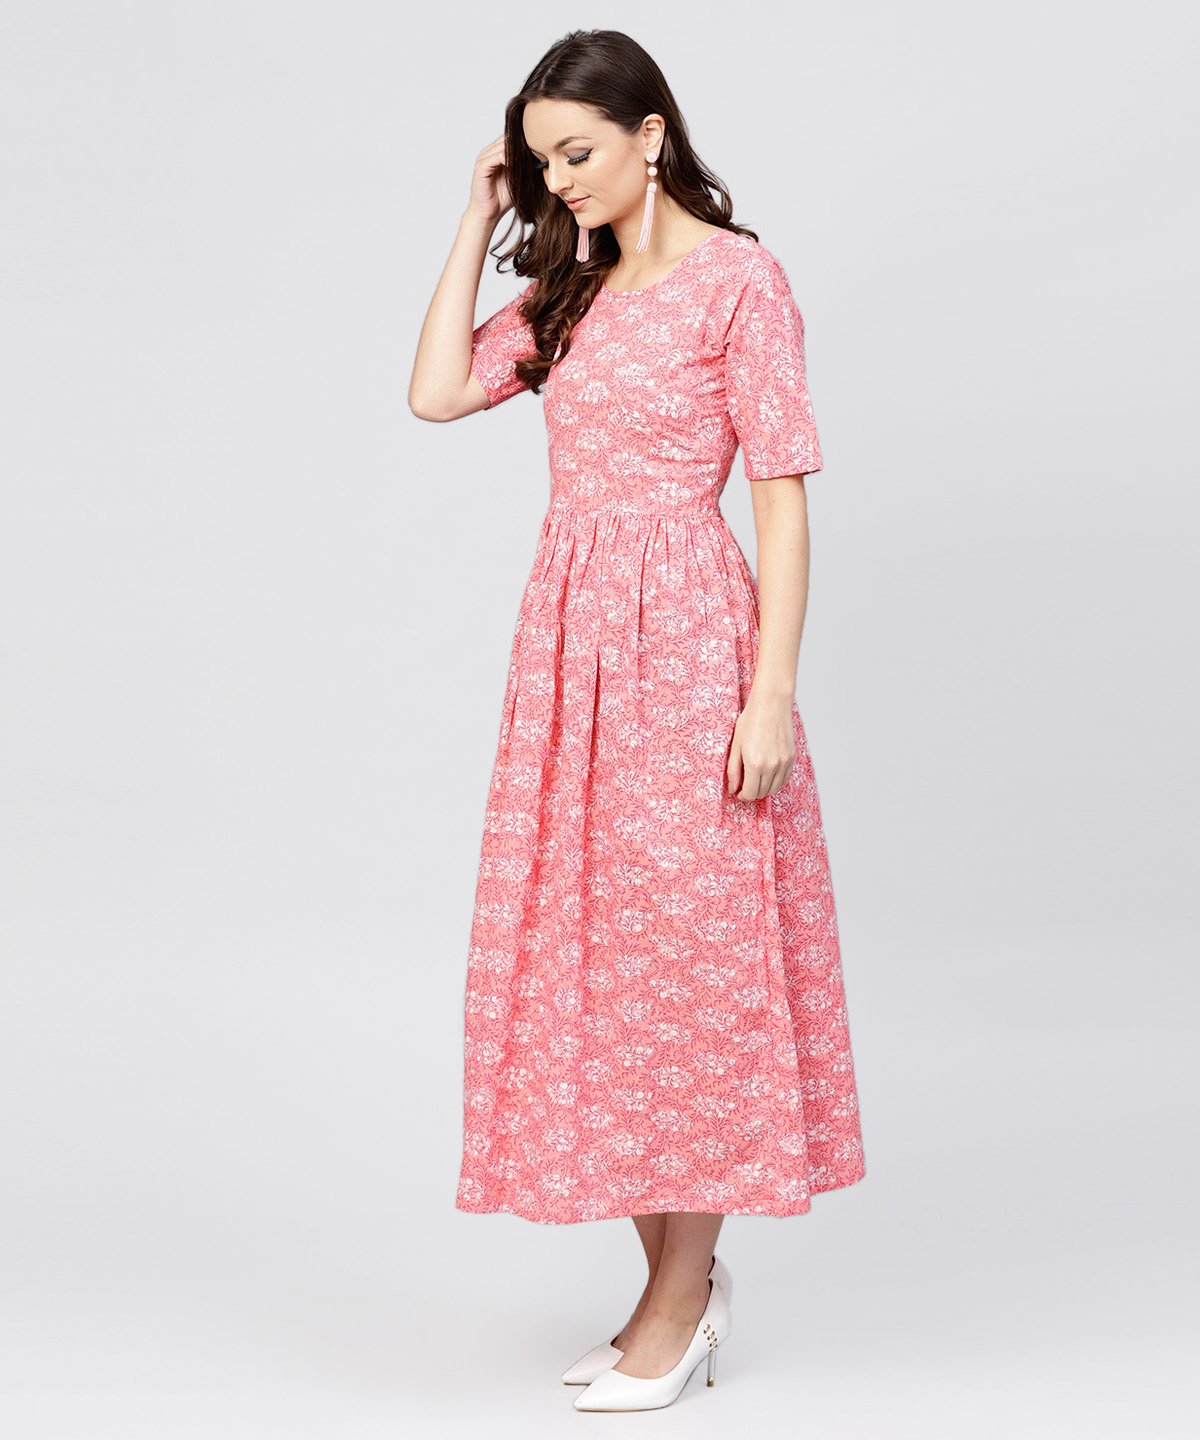 Women's Pink Printed Dress With Round Neck And Half Sleeves - Nayo Clothing